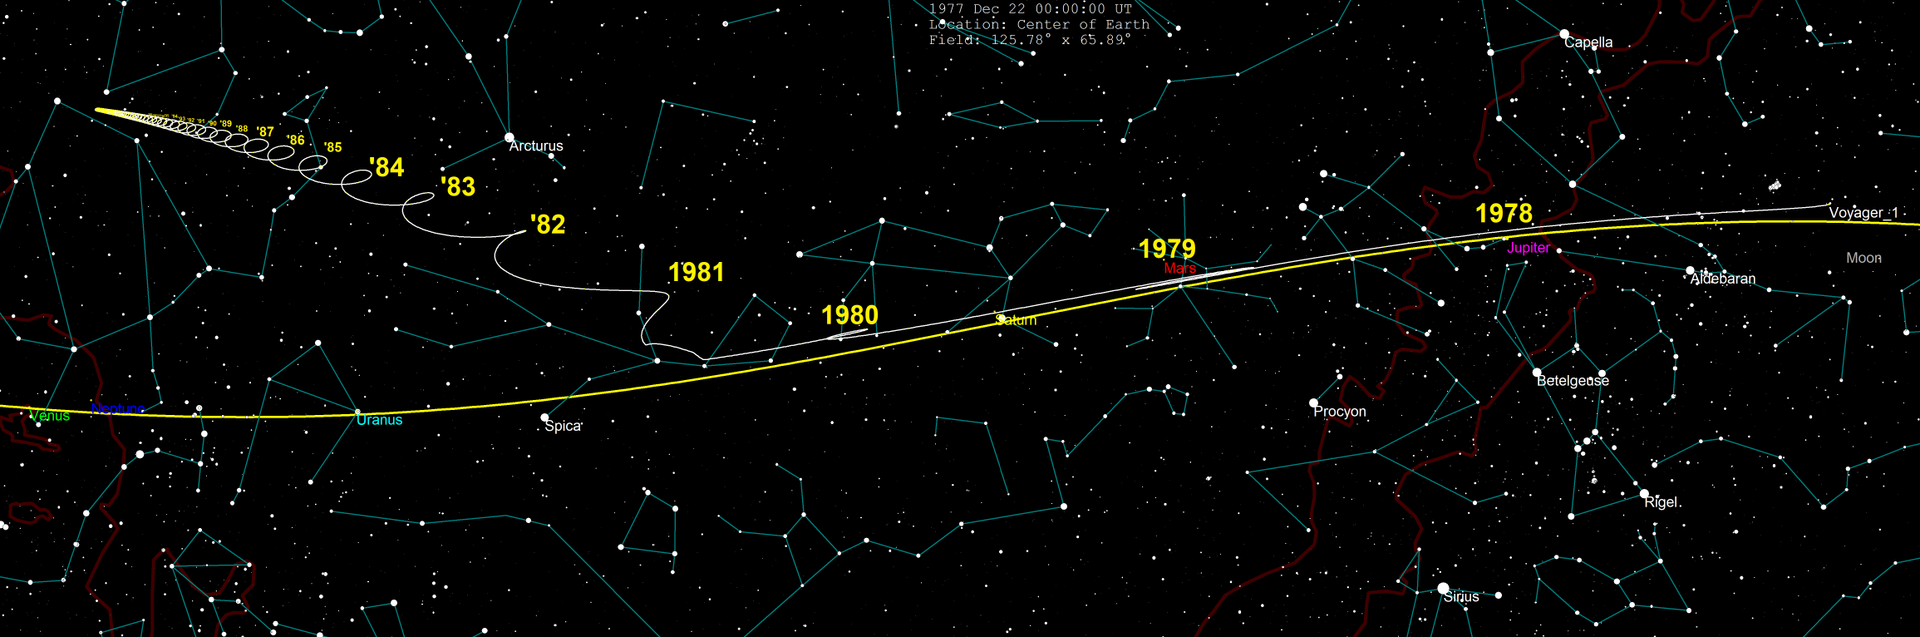 1920px-voyager_1_skypath_1977-2030.png